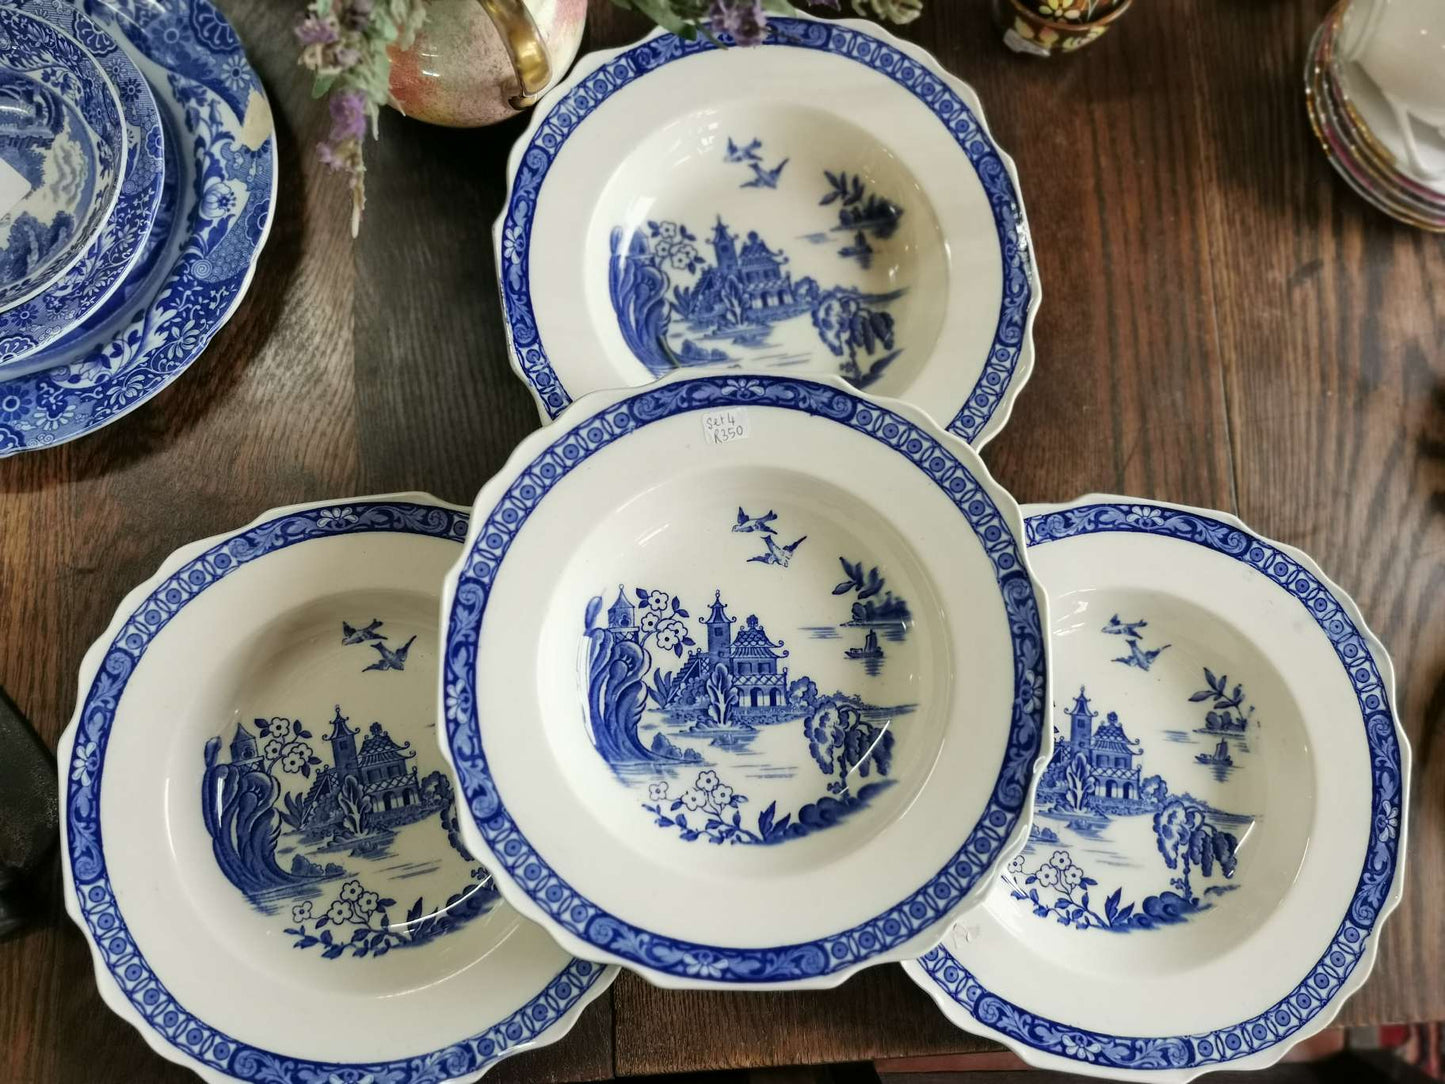 Set of 4 Blue and White plates